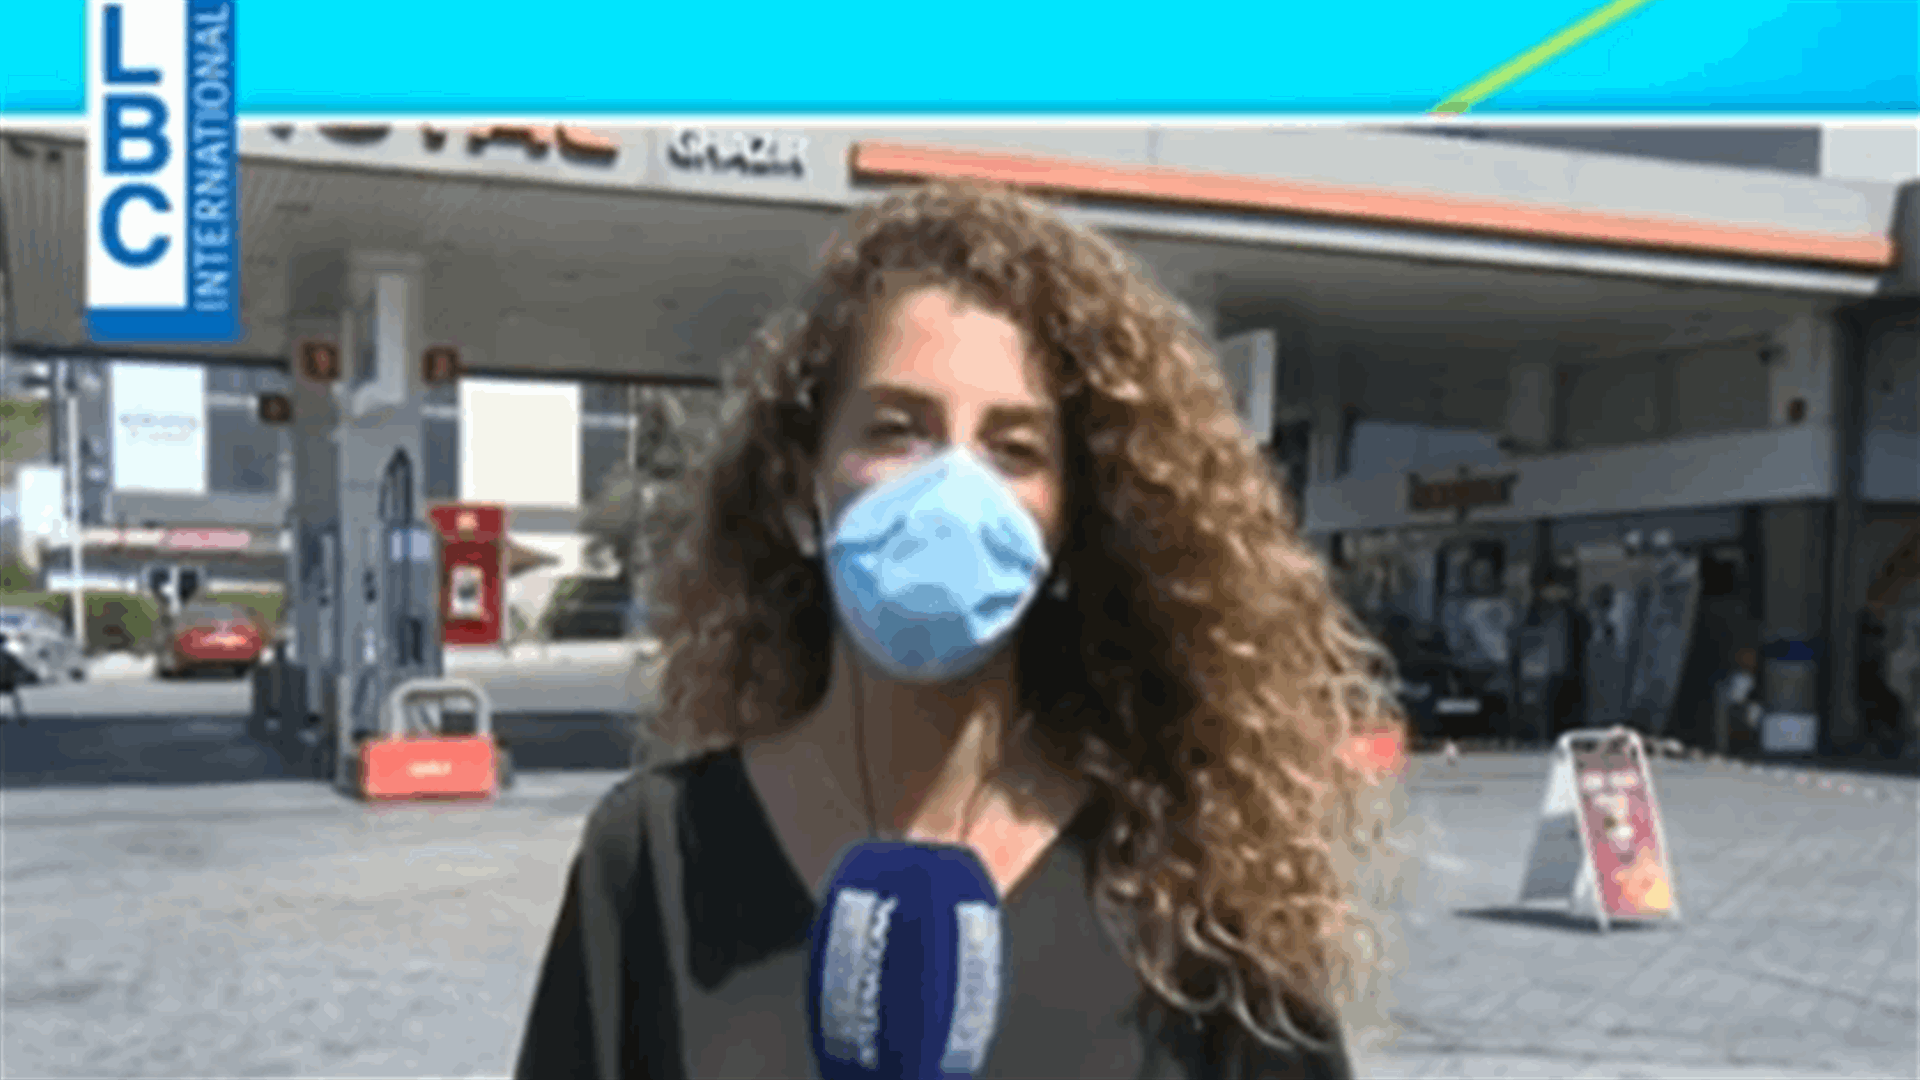 Most filling stations across Lebanon closed-[VIDEO]